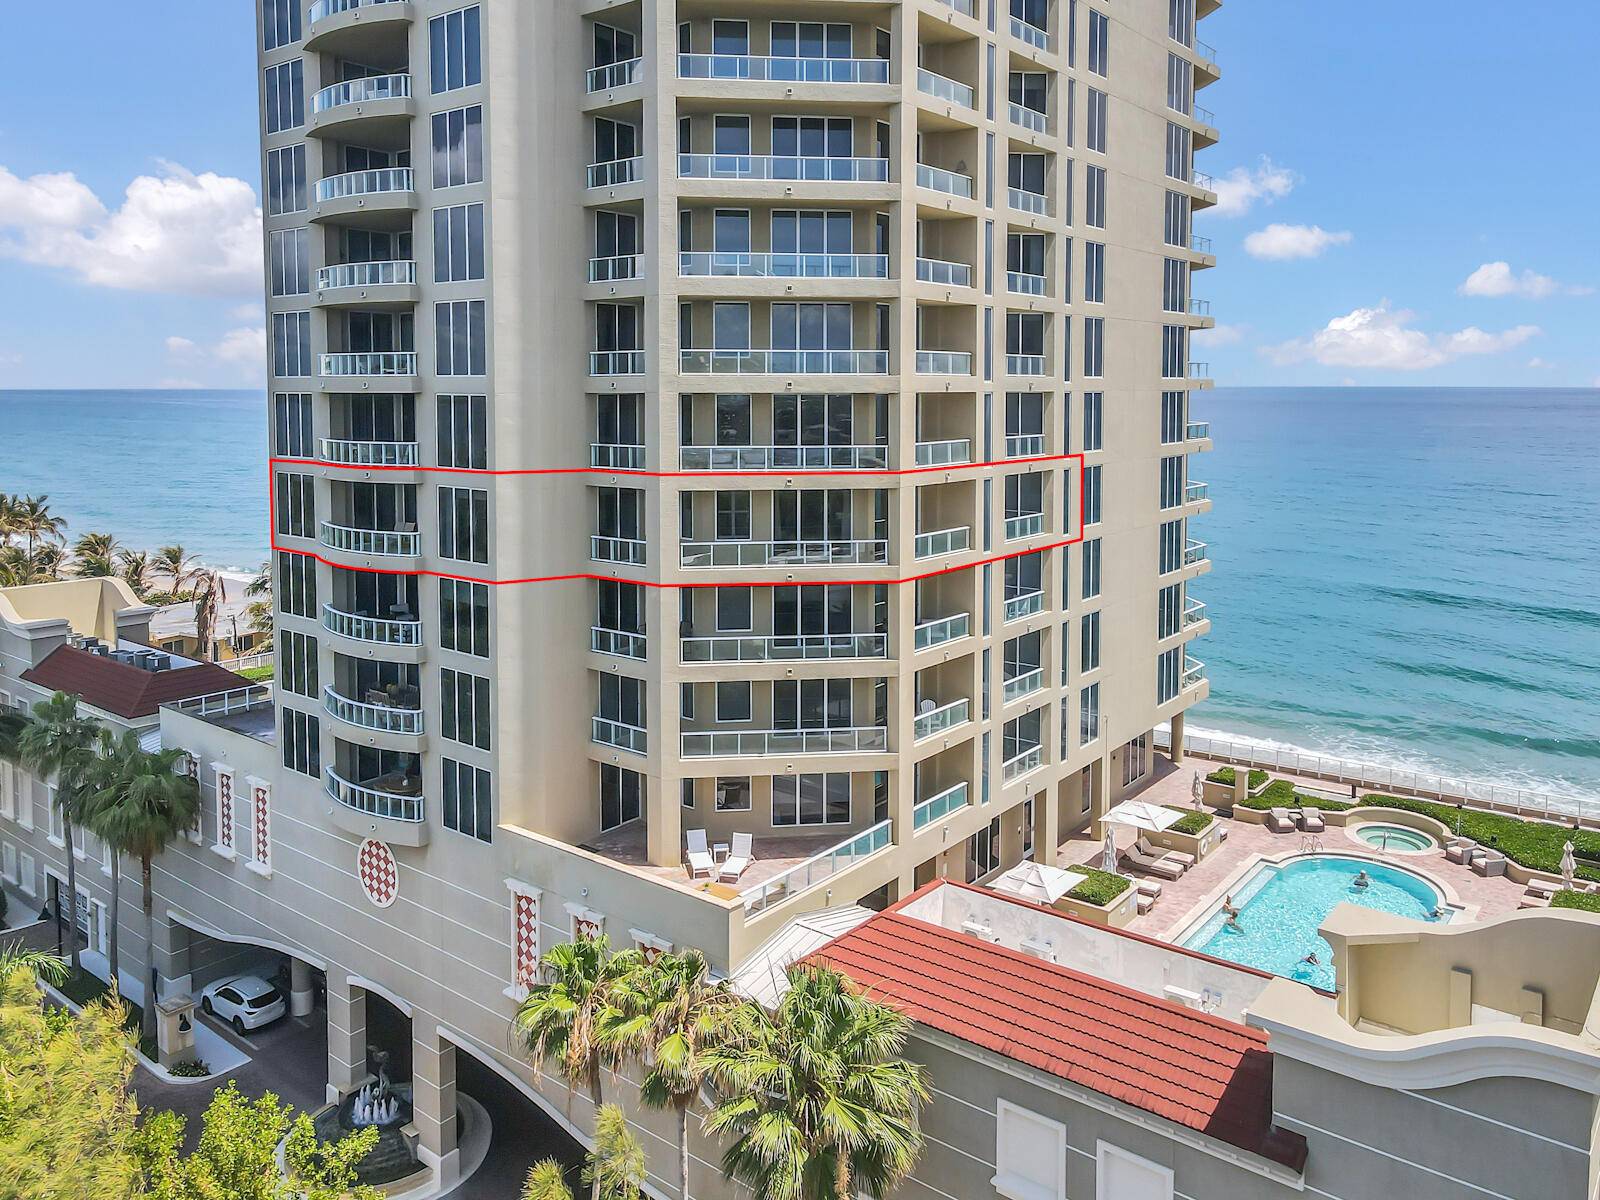 Come inside this wonderful waterfront condo and enjoy spacious living areas with tons of natural light and breathtaking views of both the ocean intercoastal from multiple balconies.